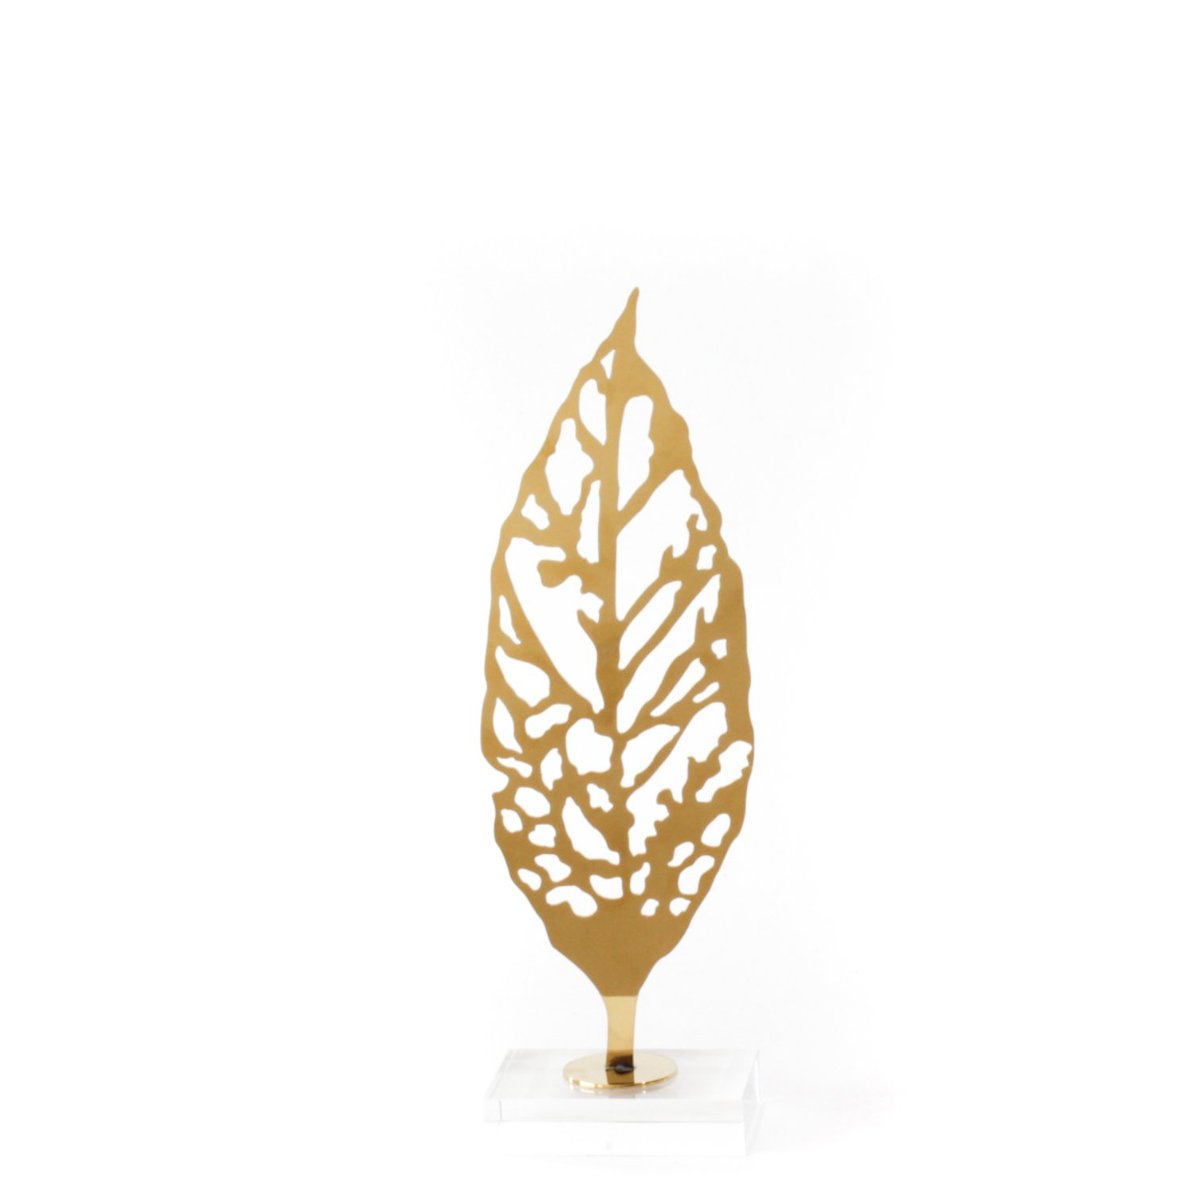 Gold Leaf Sculpture, crystal glass base, stainless steel , small size